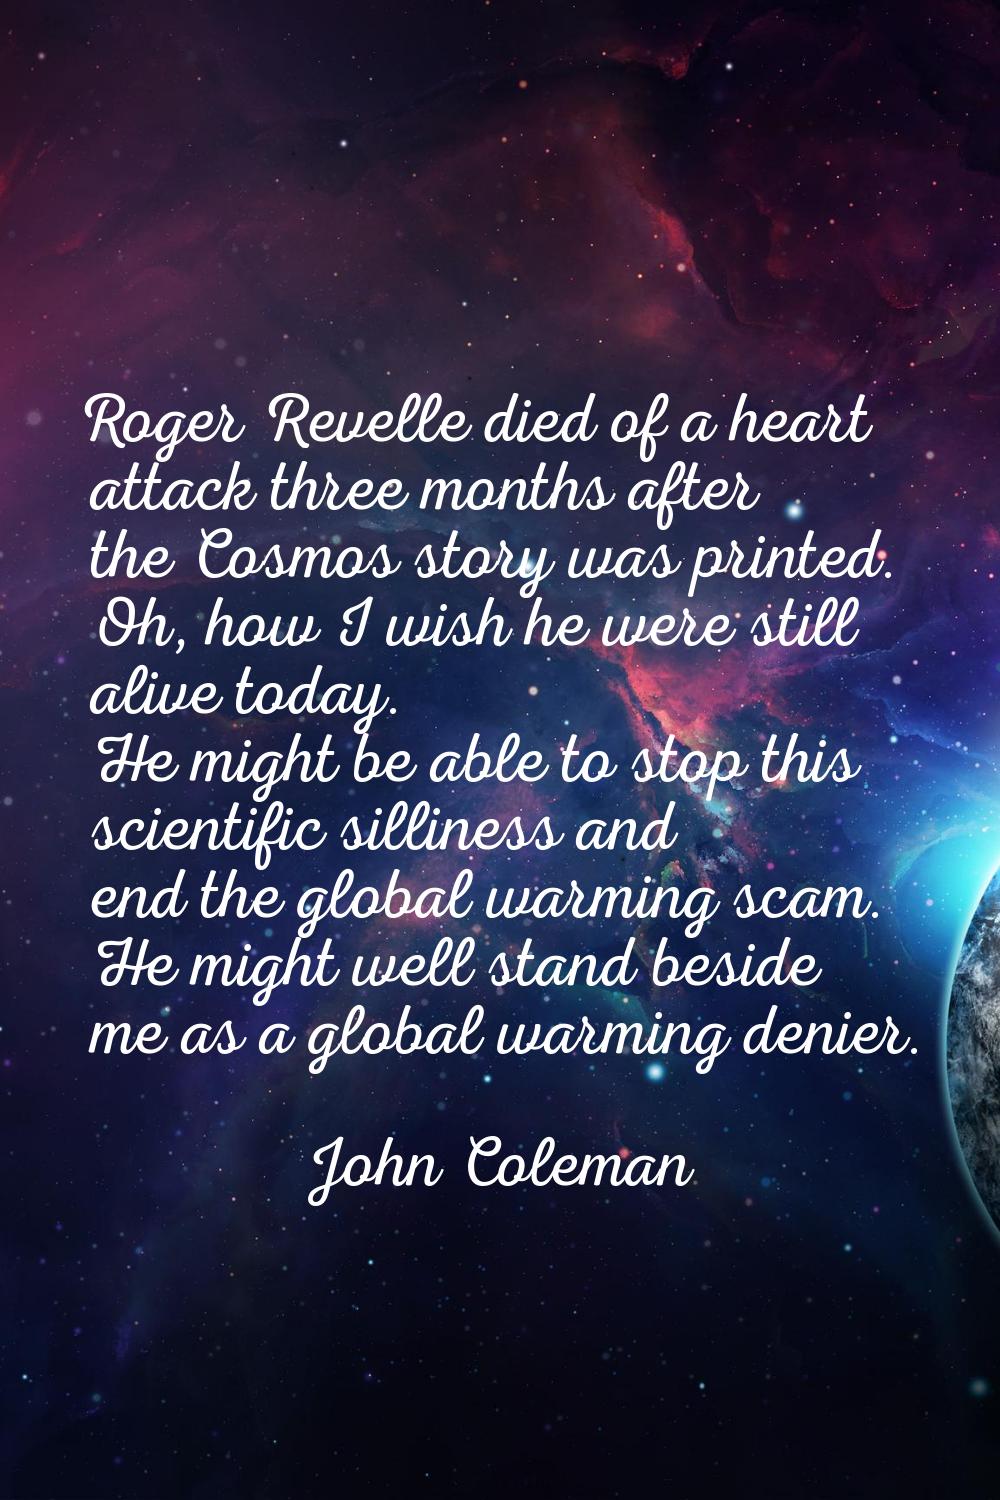 Roger Revelle died of a heart attack three months after the Cosmos story was printed. Oh, how I wis